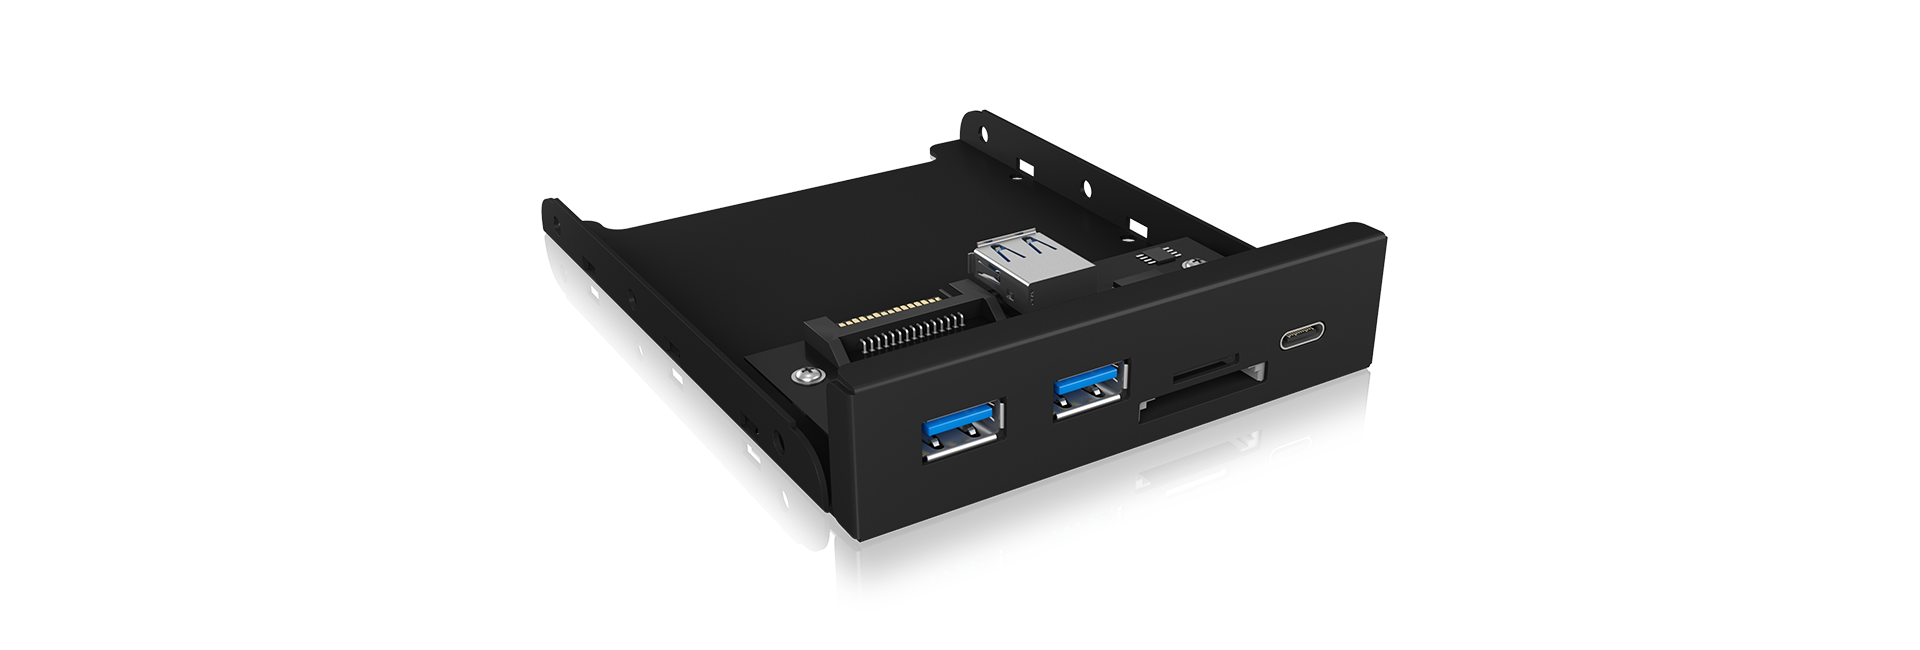 ICY BOX IB-HUB1417-i3 Frontpanel with USB 3.0 Type-C and Type-A hub with card reader - image2